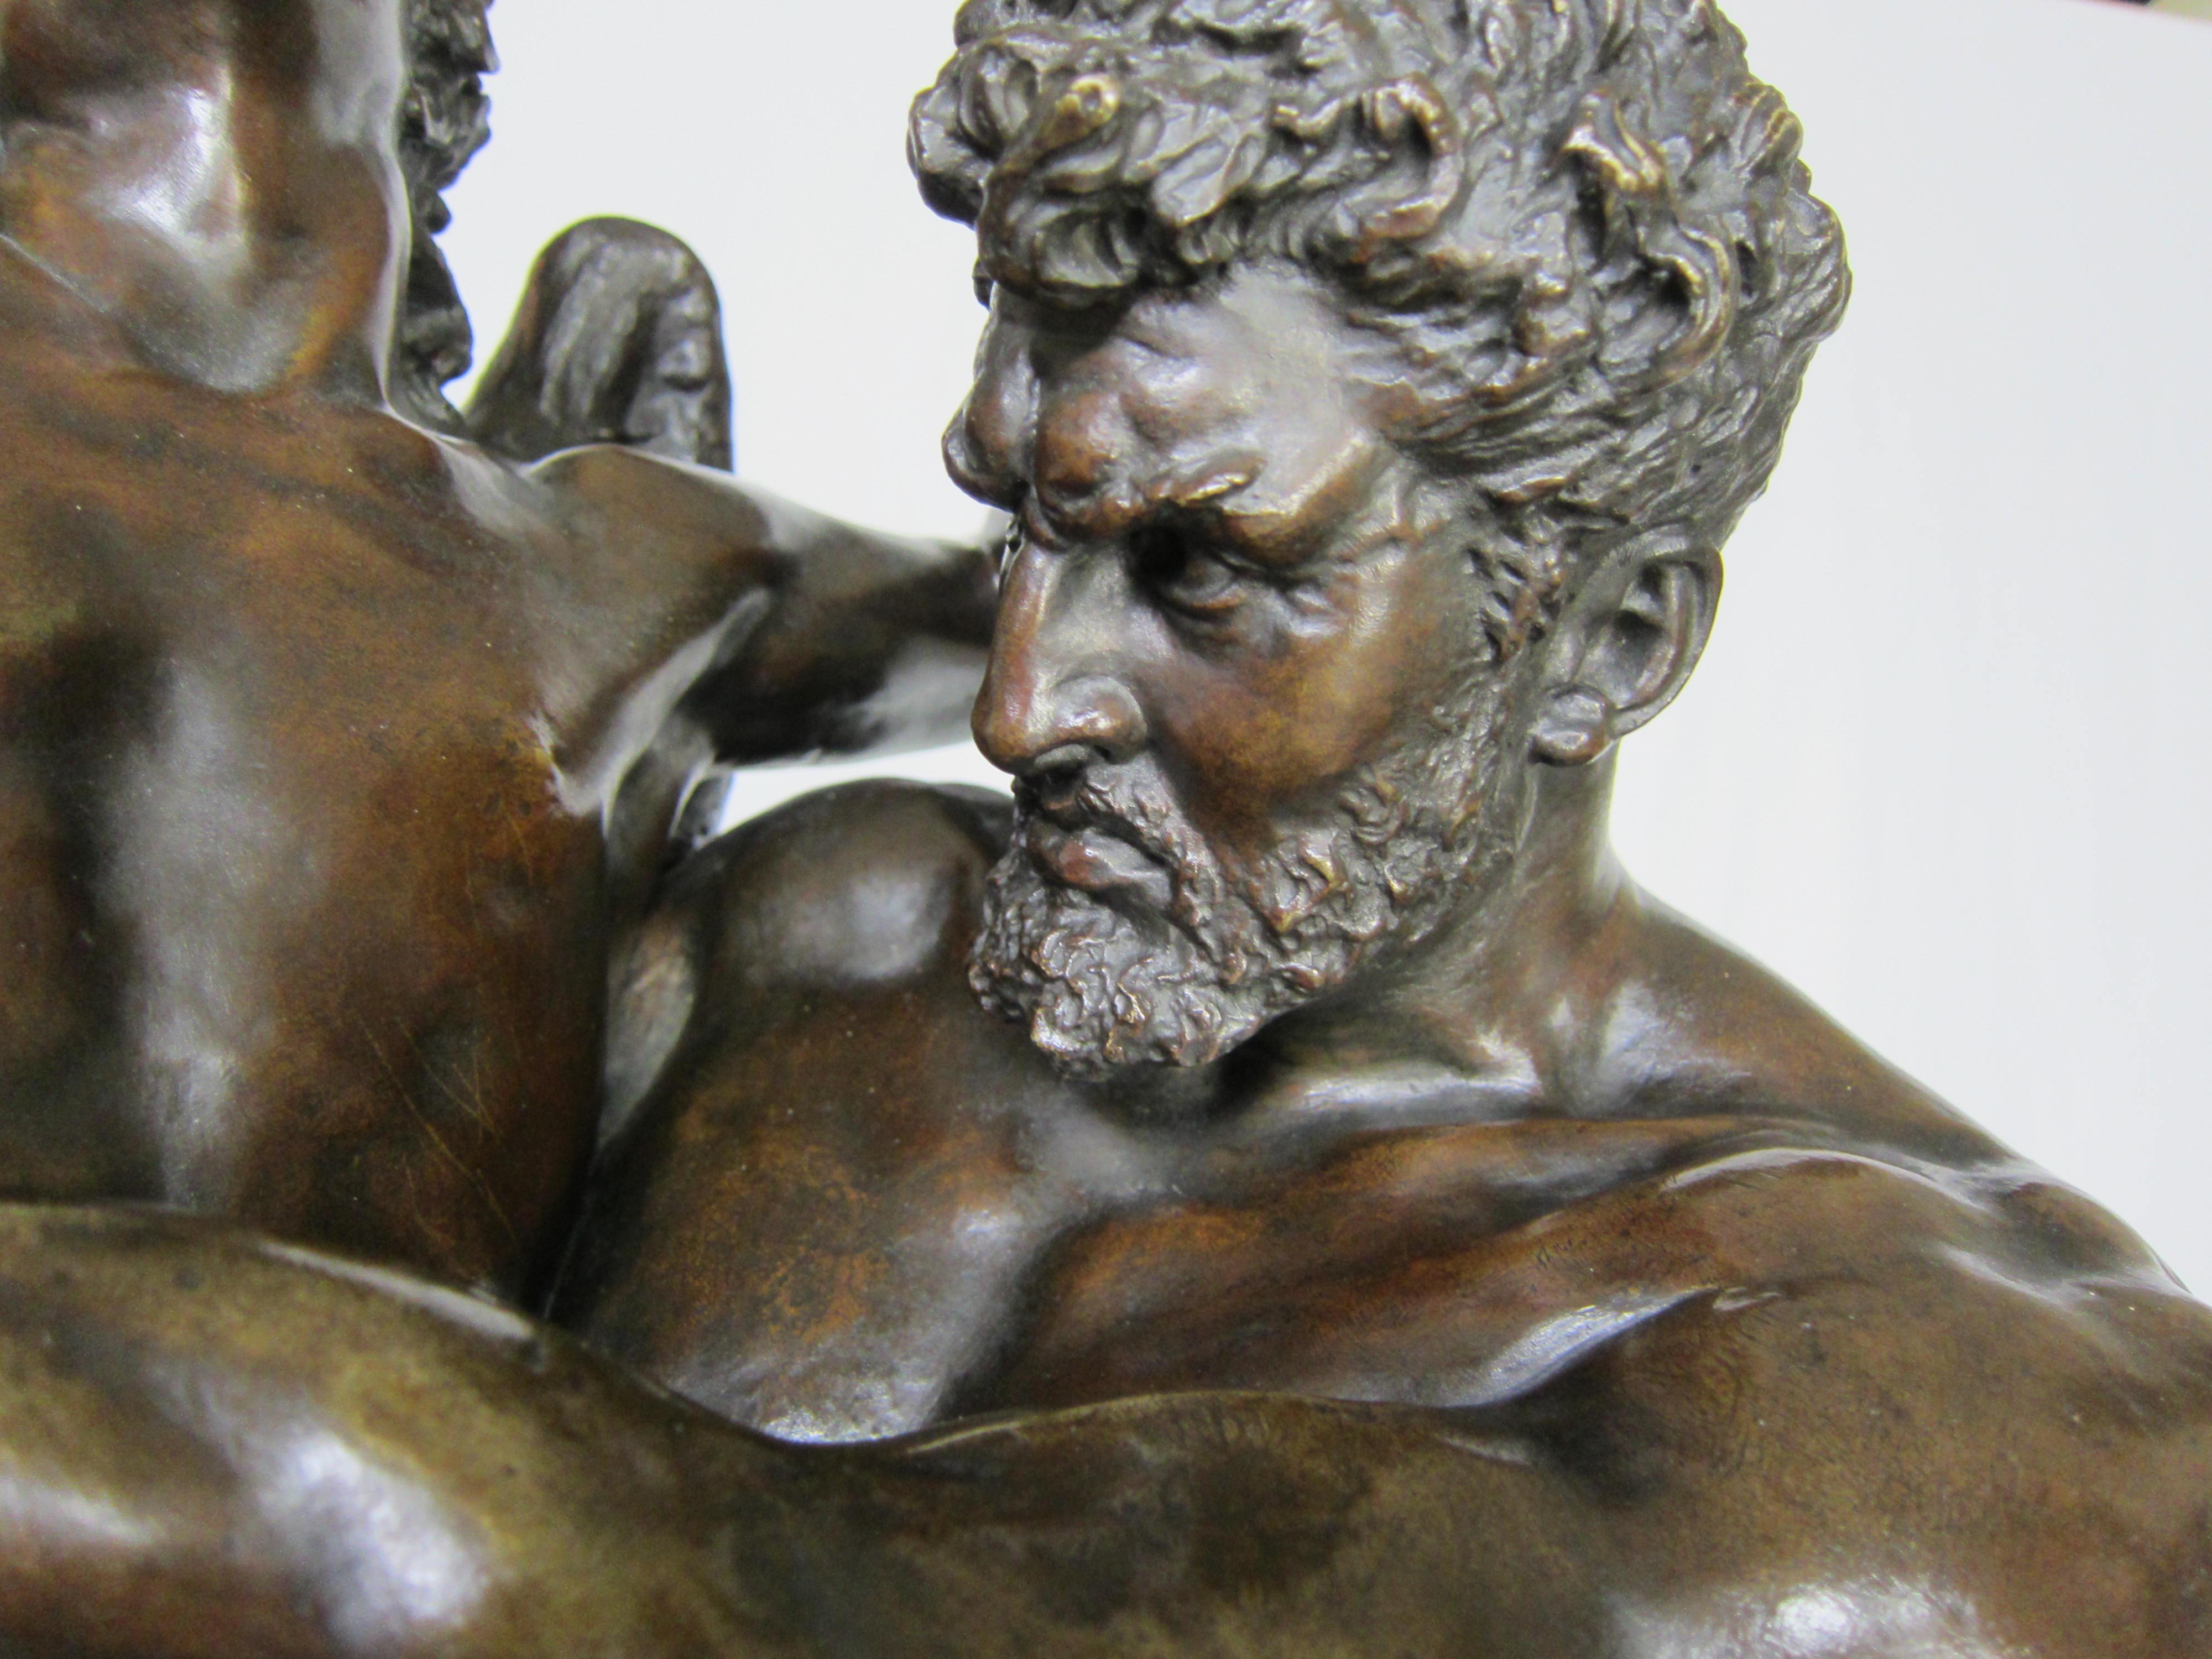 Antique Bronze Sculpture Genius and Brute Force by Cyprien Godebski For Sale 2